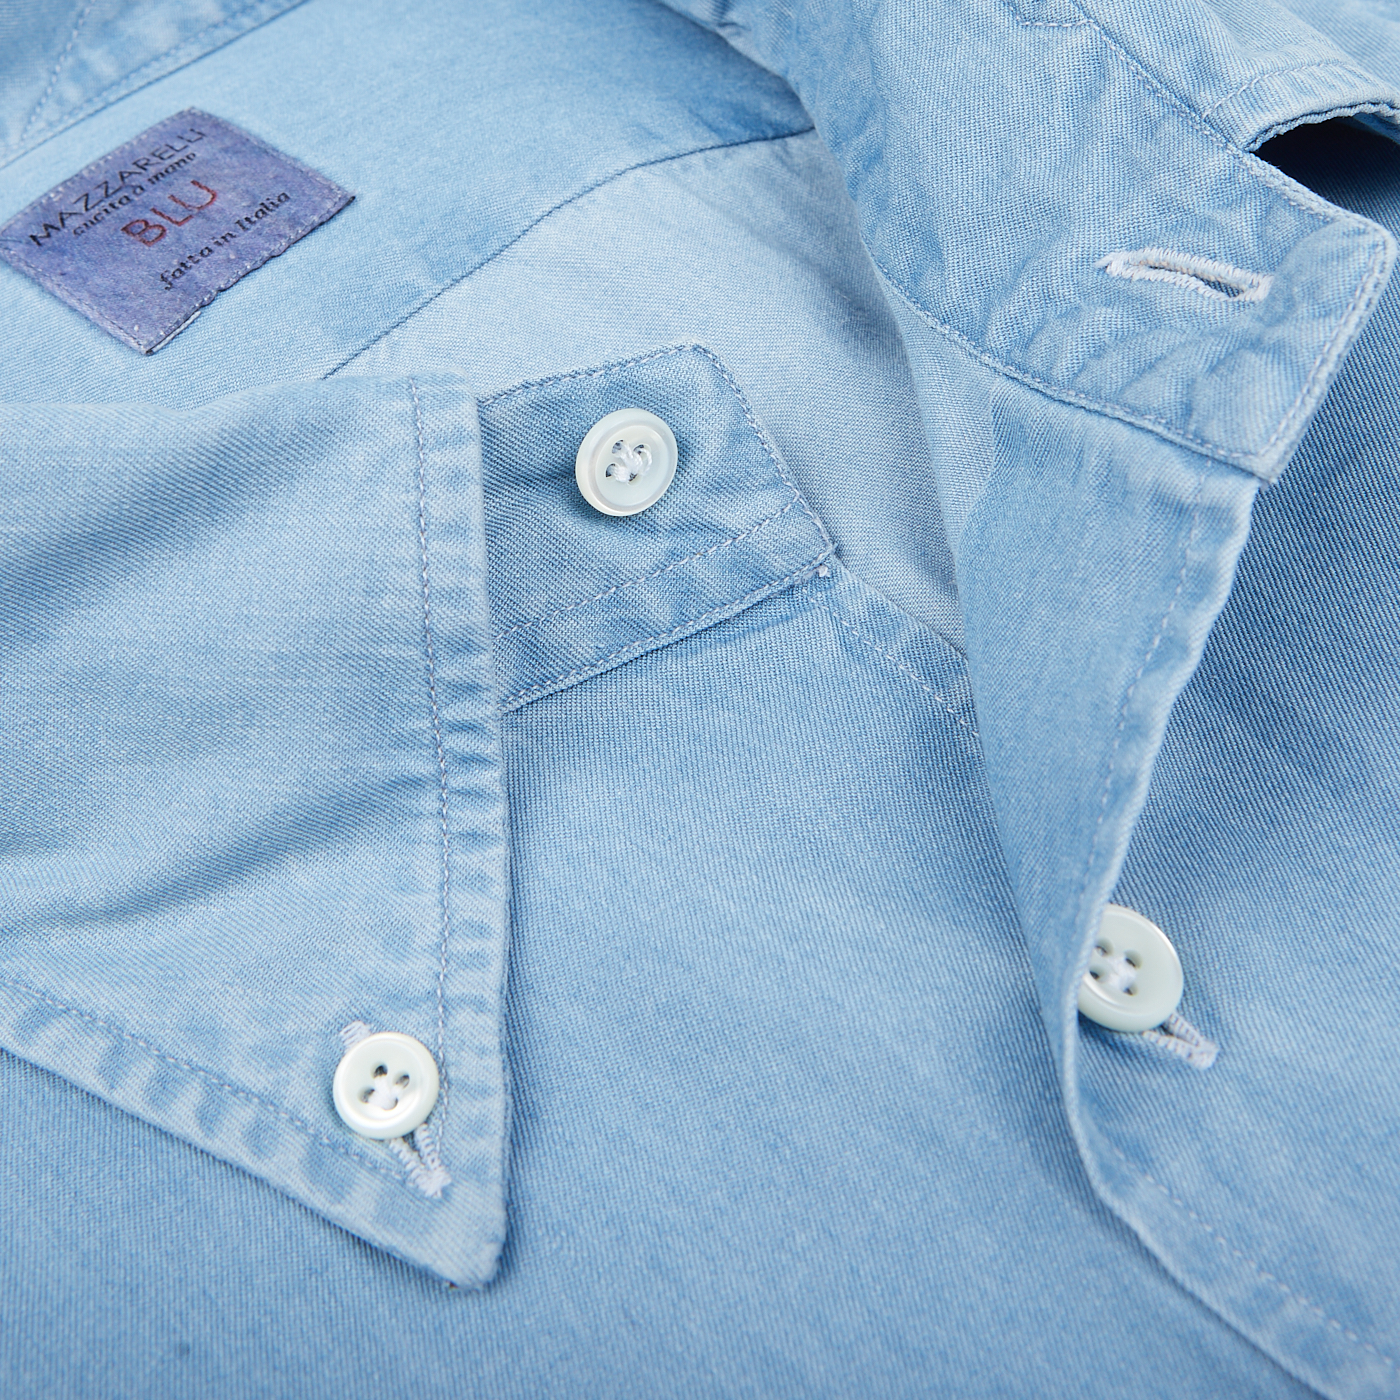 Close-up of a Light Denim Washed Cotton BD Regular Fit Shirt with white buttons from Italian shirtmaker Mazzarelli.